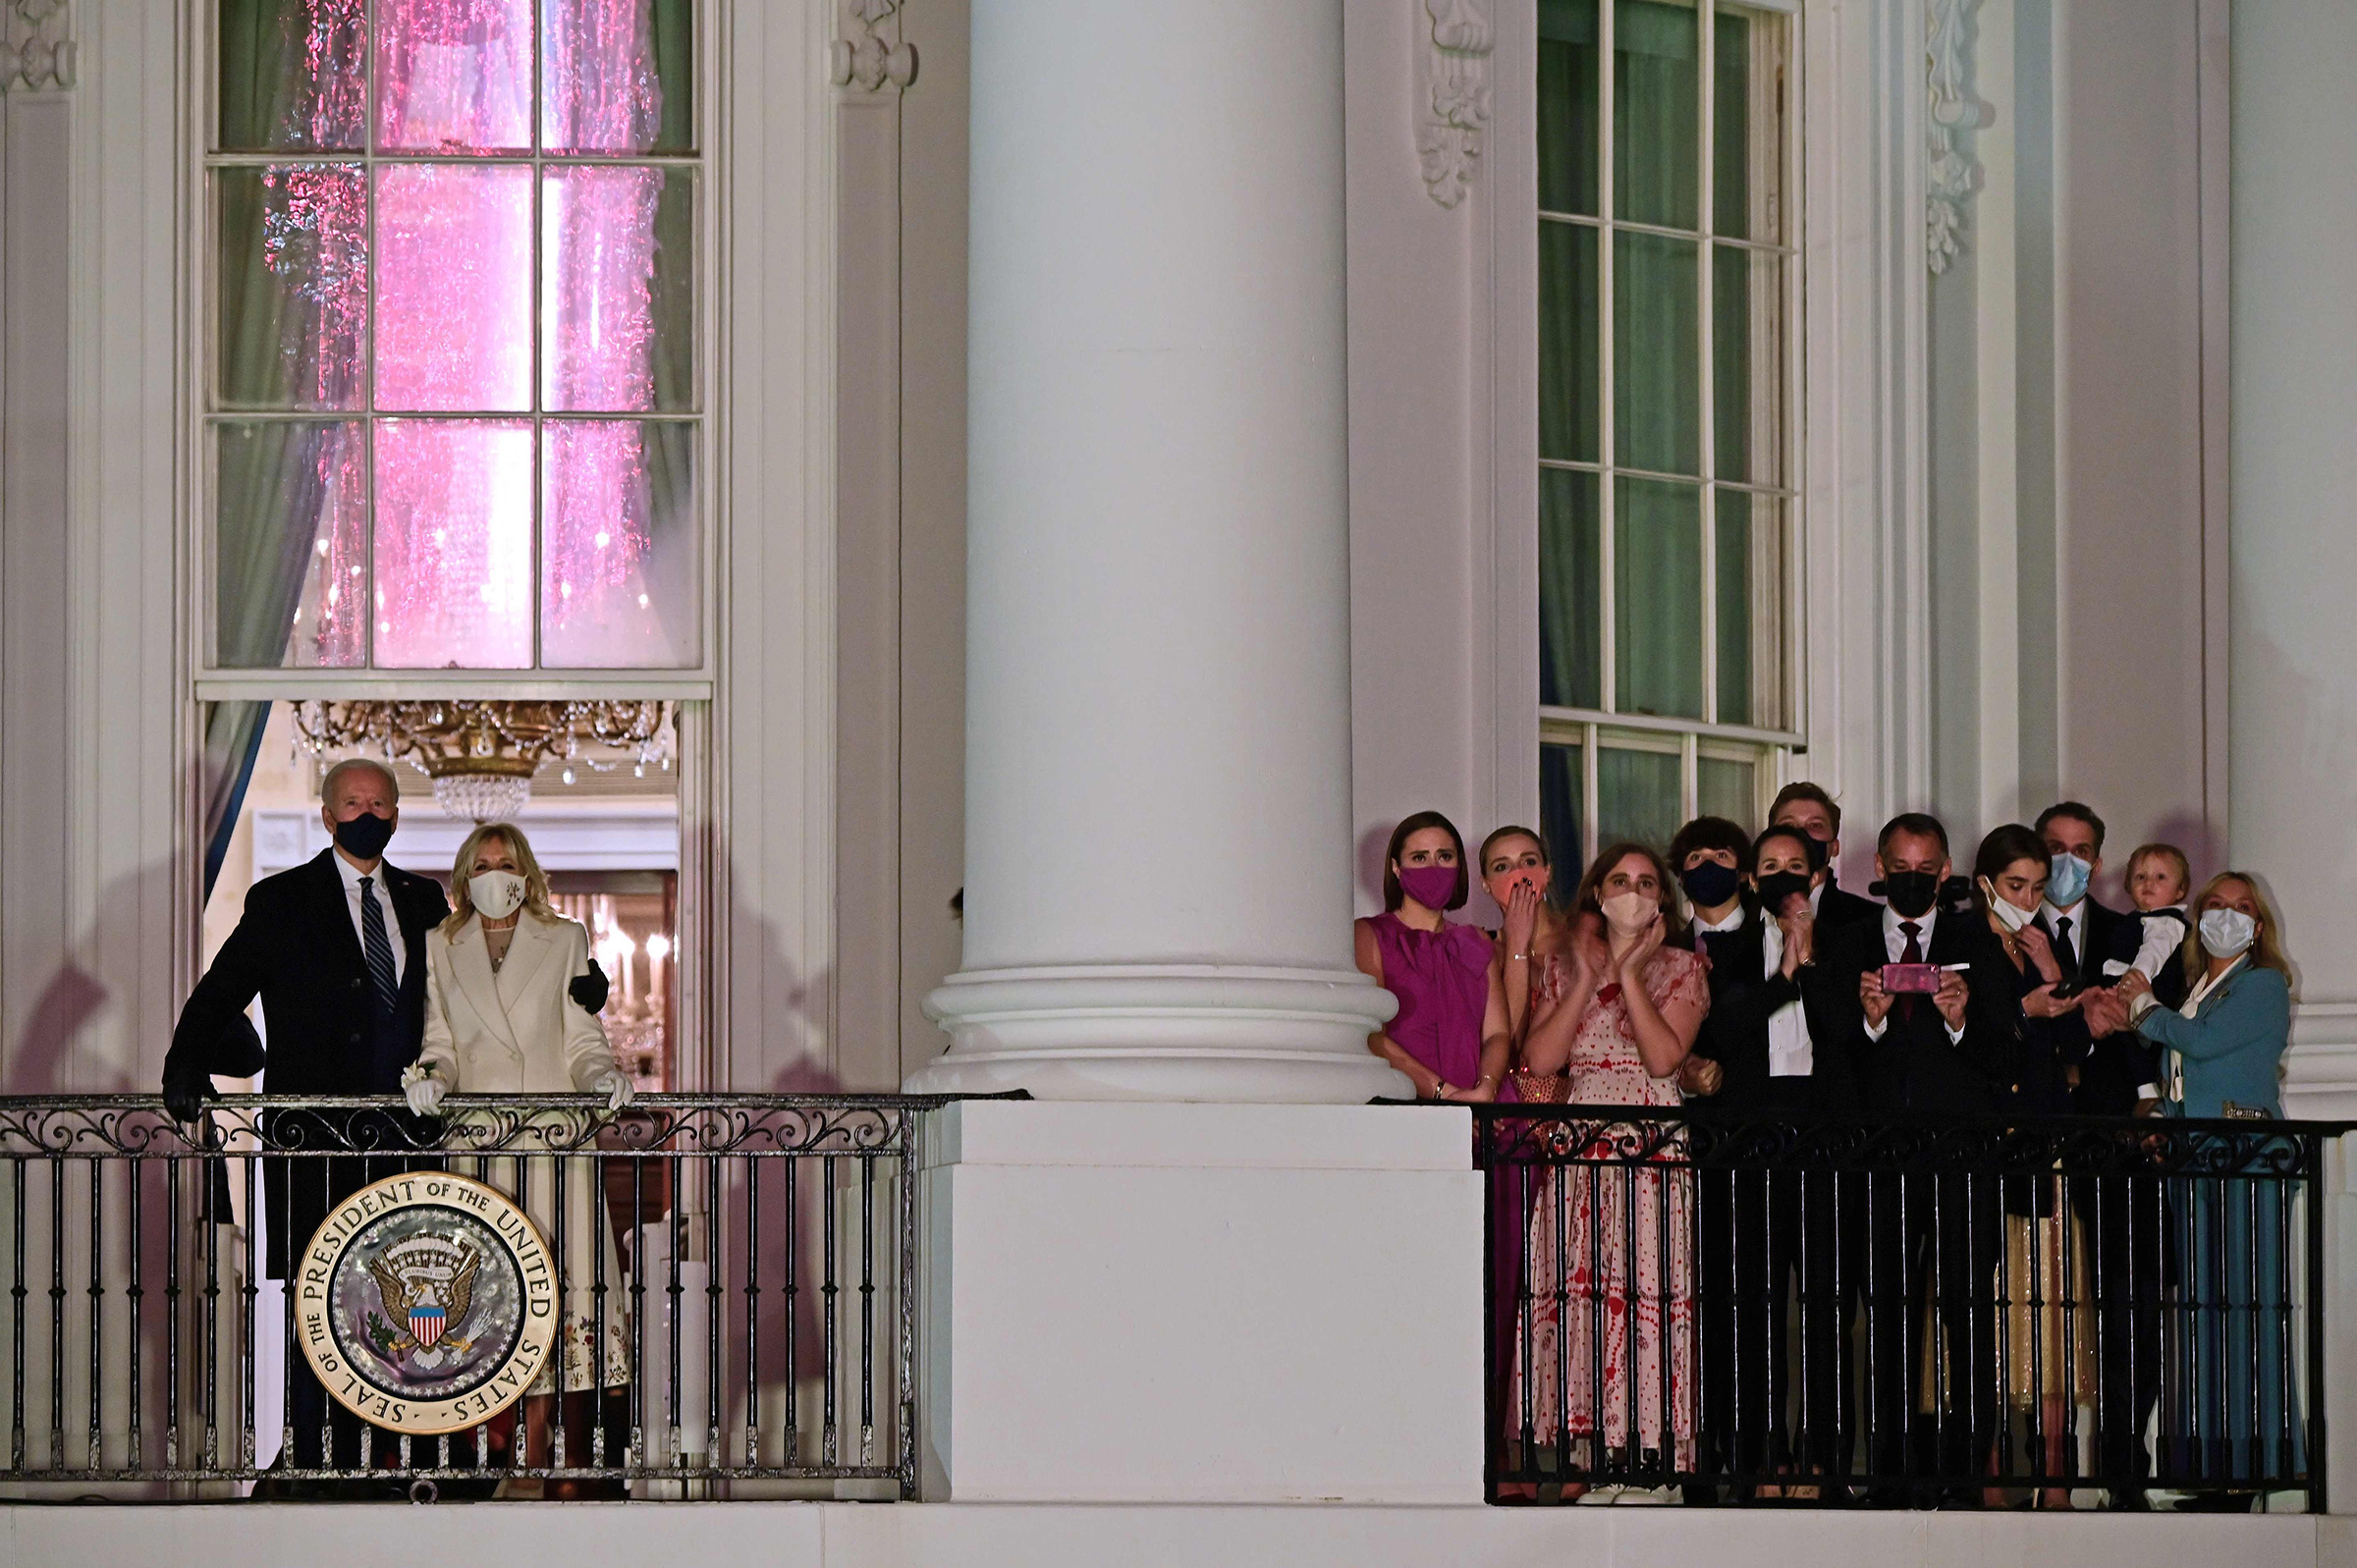 President Joe Biden, First Lady Dr. Jill Biden and family watch fireworks from the Blue Room Balcony of the White House. (Jim Watson—AFP/Getty Images)